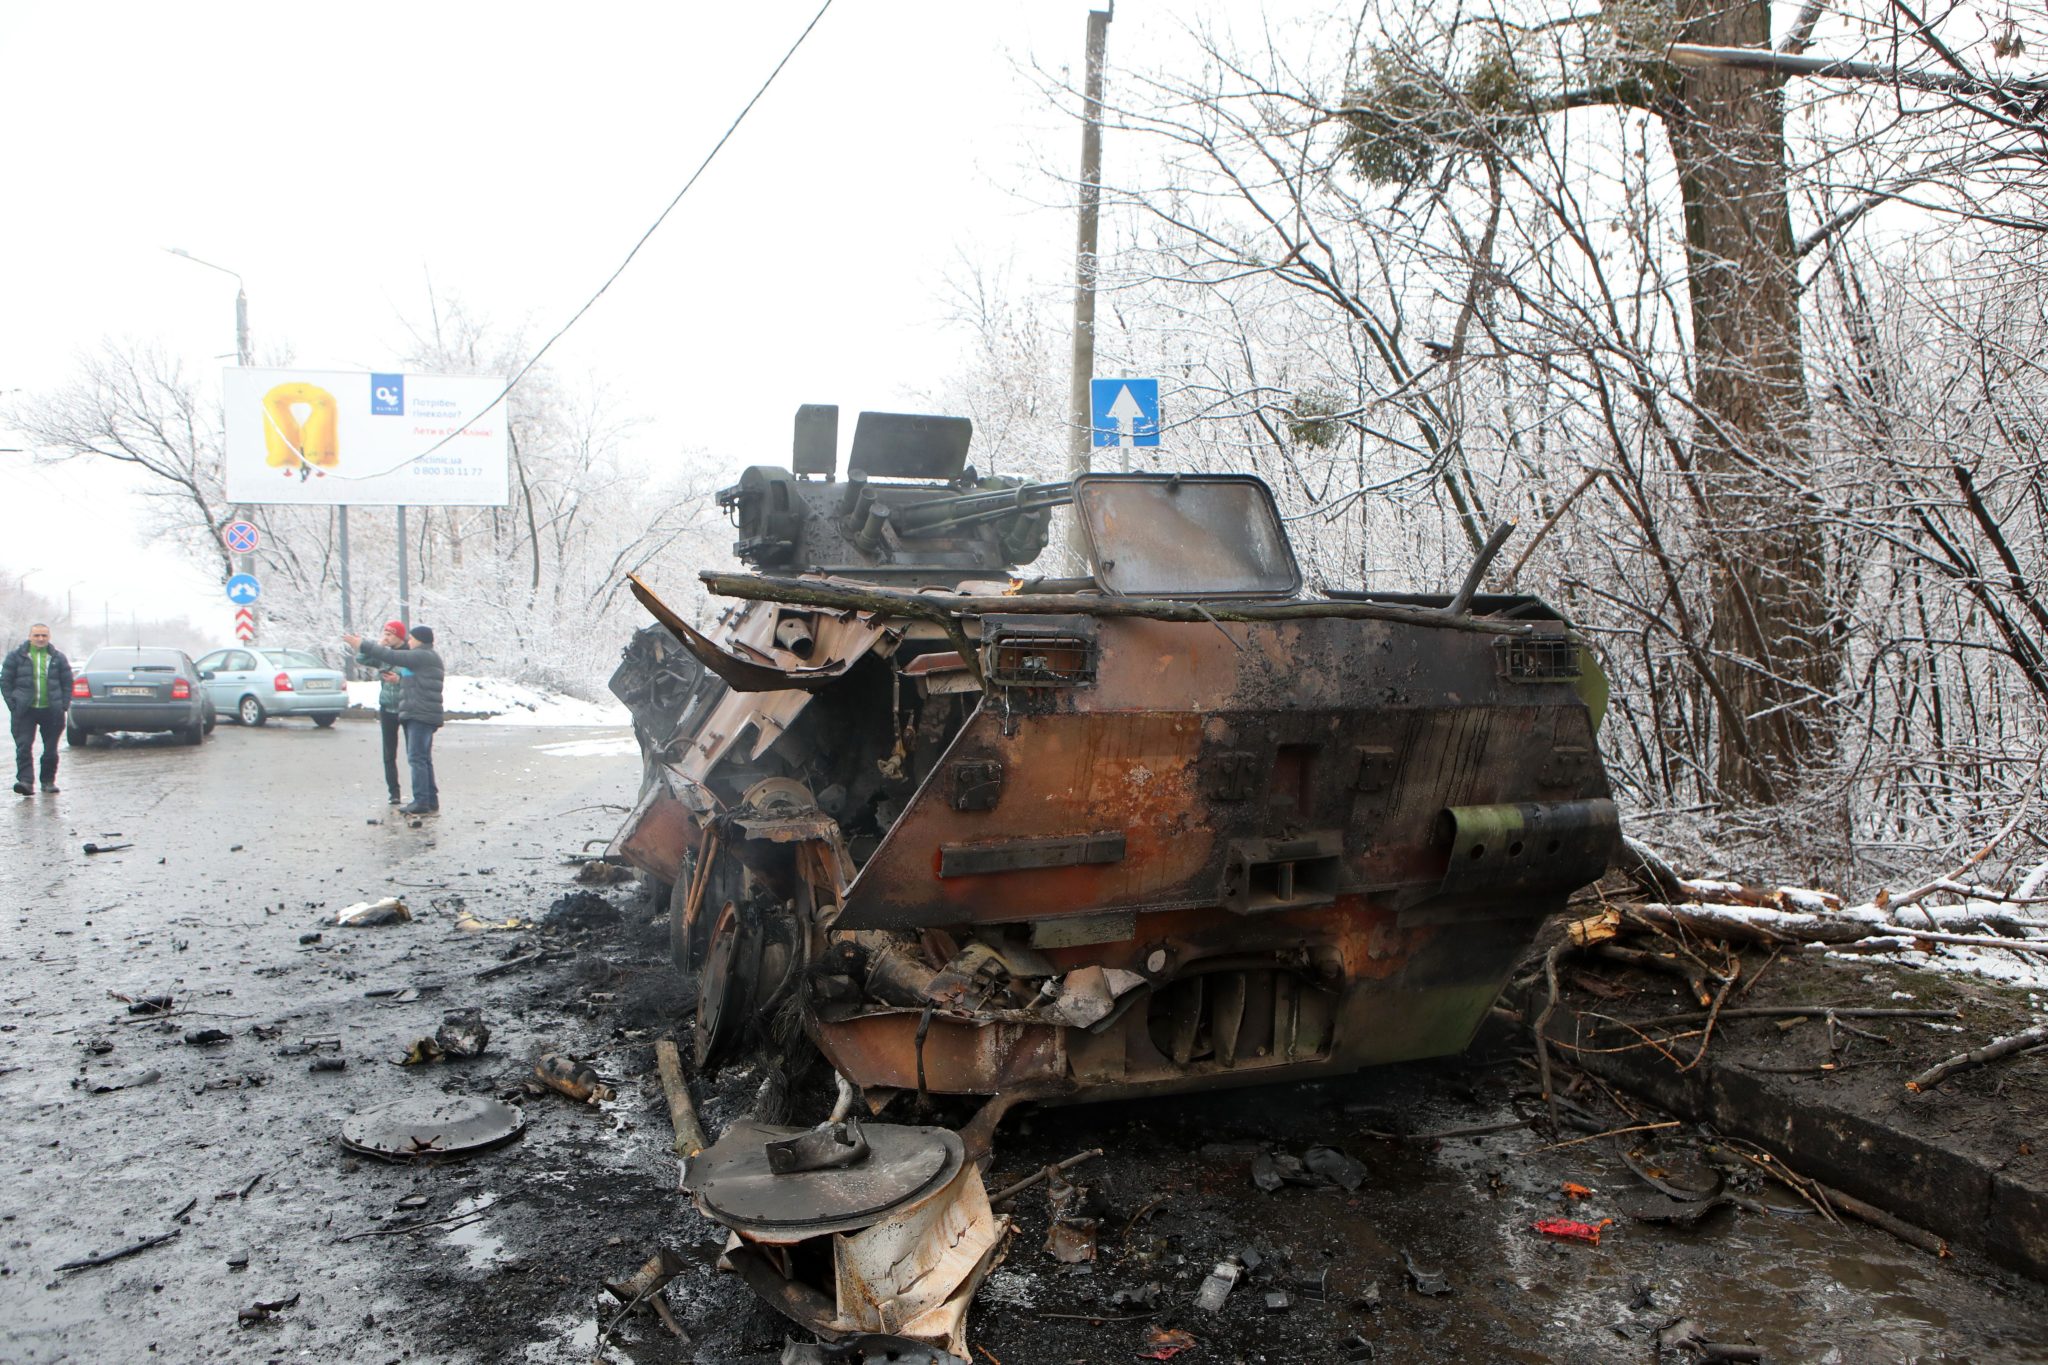 A damaged military vehicle is pictured on the outskirts of Kharkiv, northeastern Ukraine